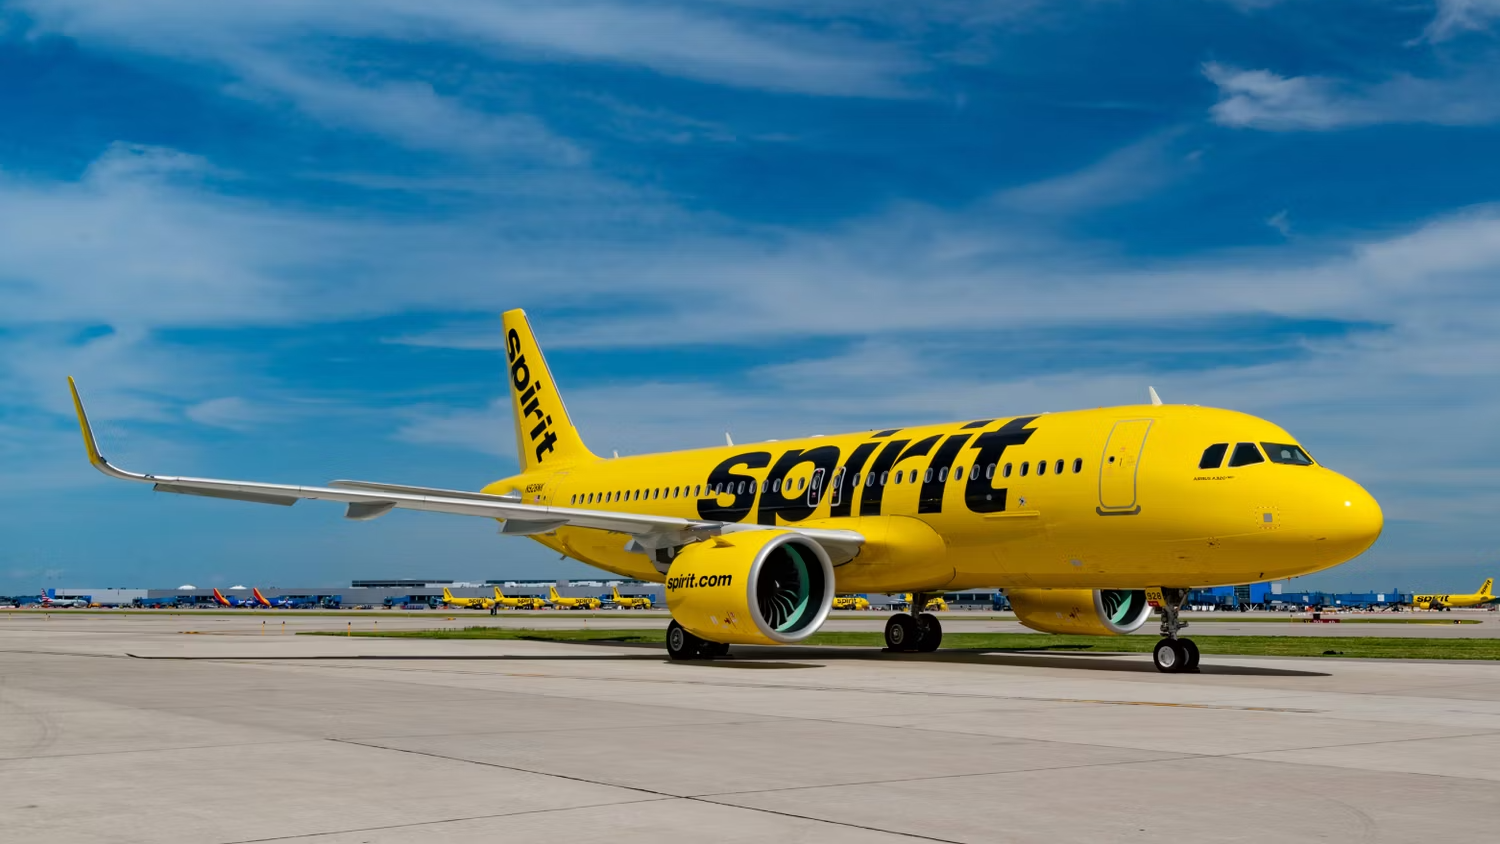 A Spirit Airlines Airbus A320neo Taxiing At An Airport.